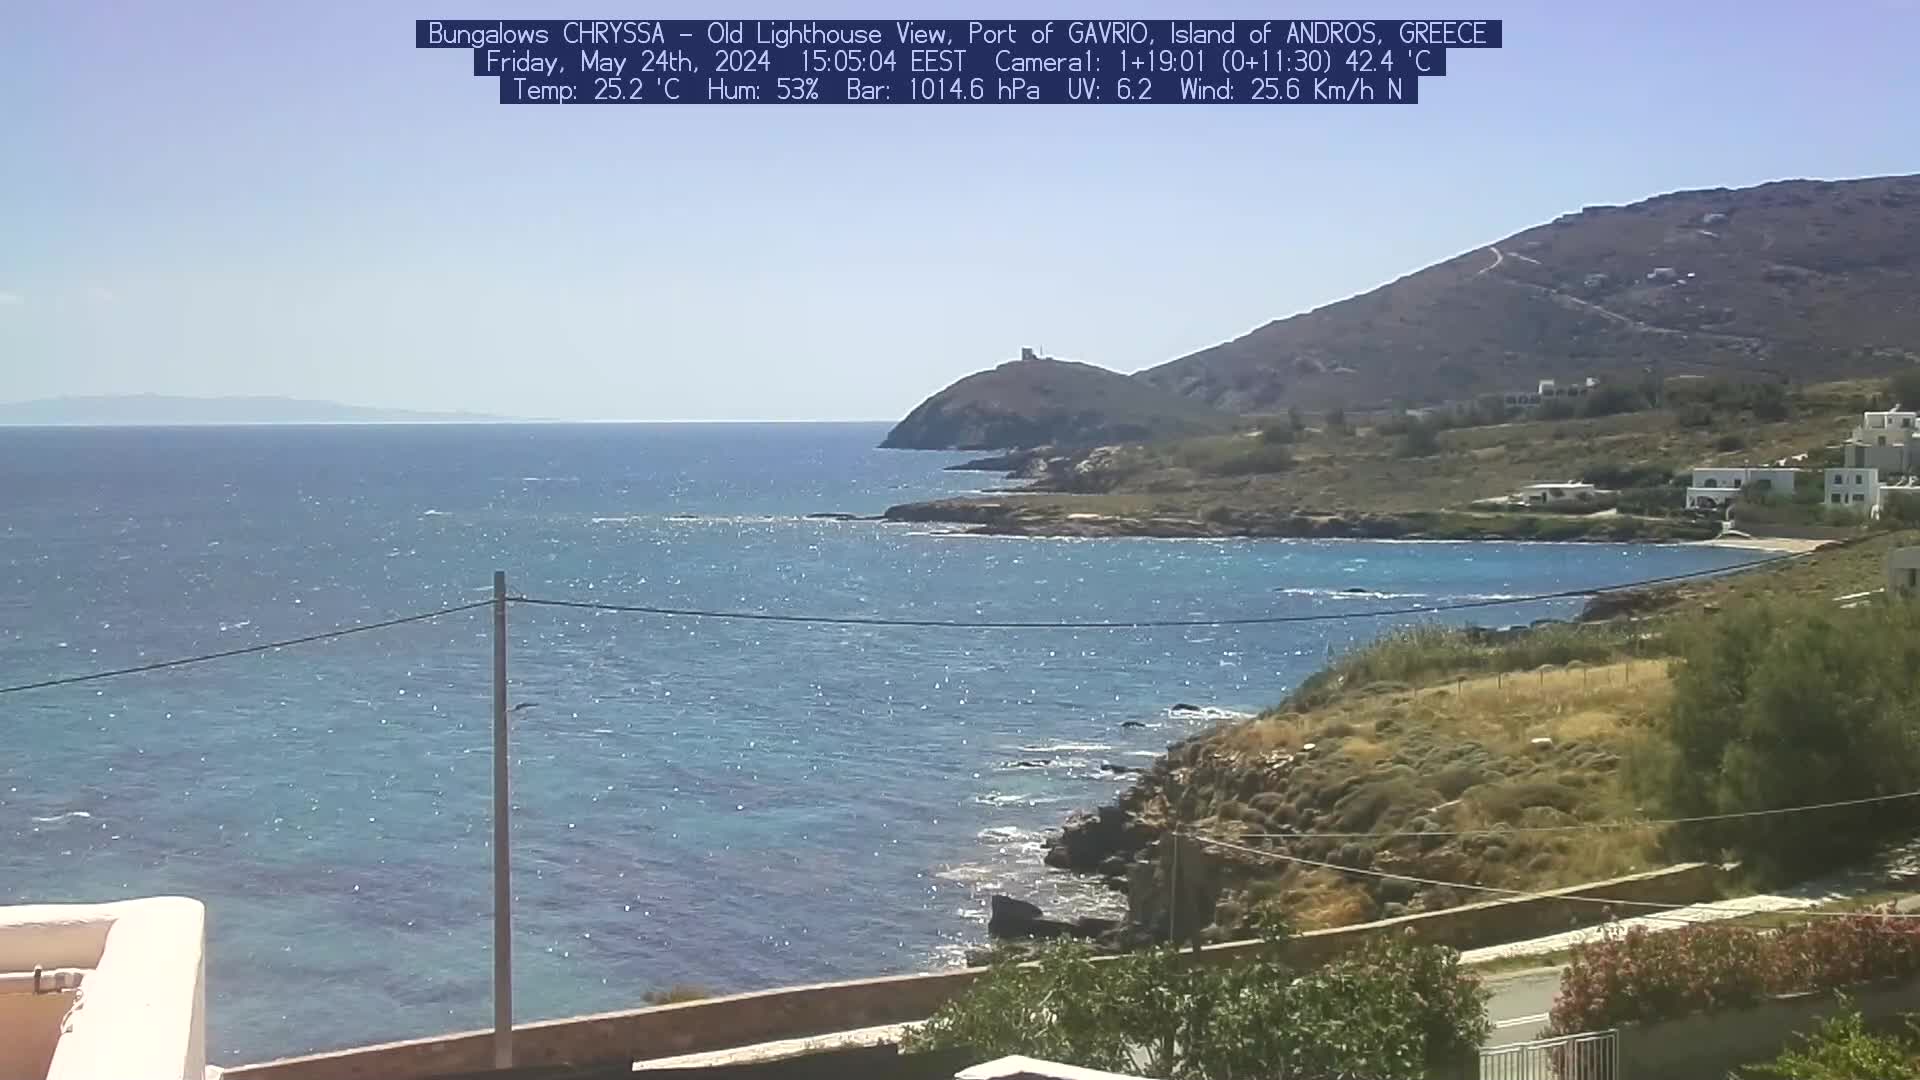 Gavrio (Andros) Wed. 15:05